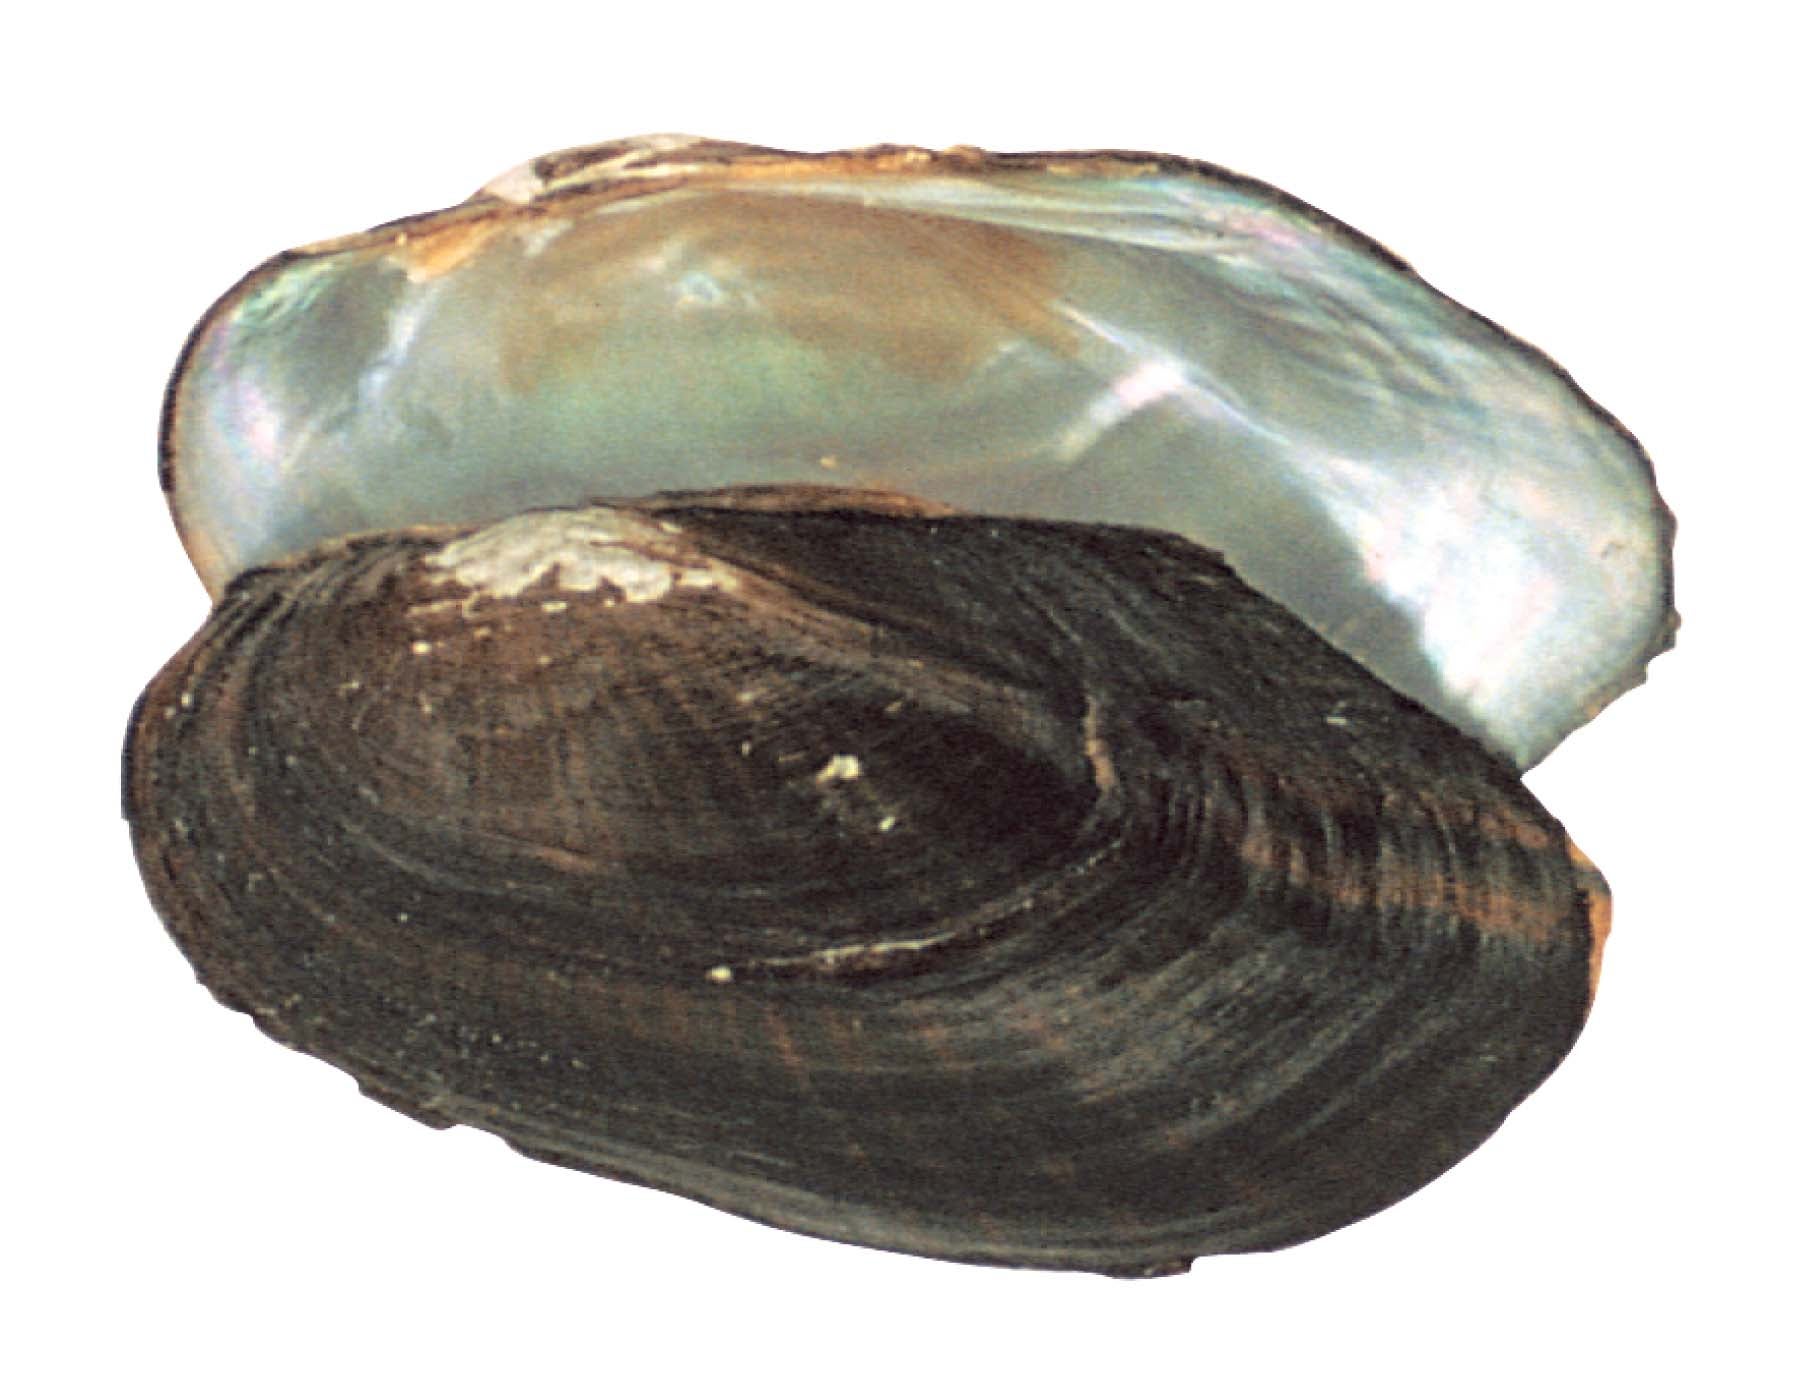 pond mussel, showing the upper outside of the shell and the shiny inside